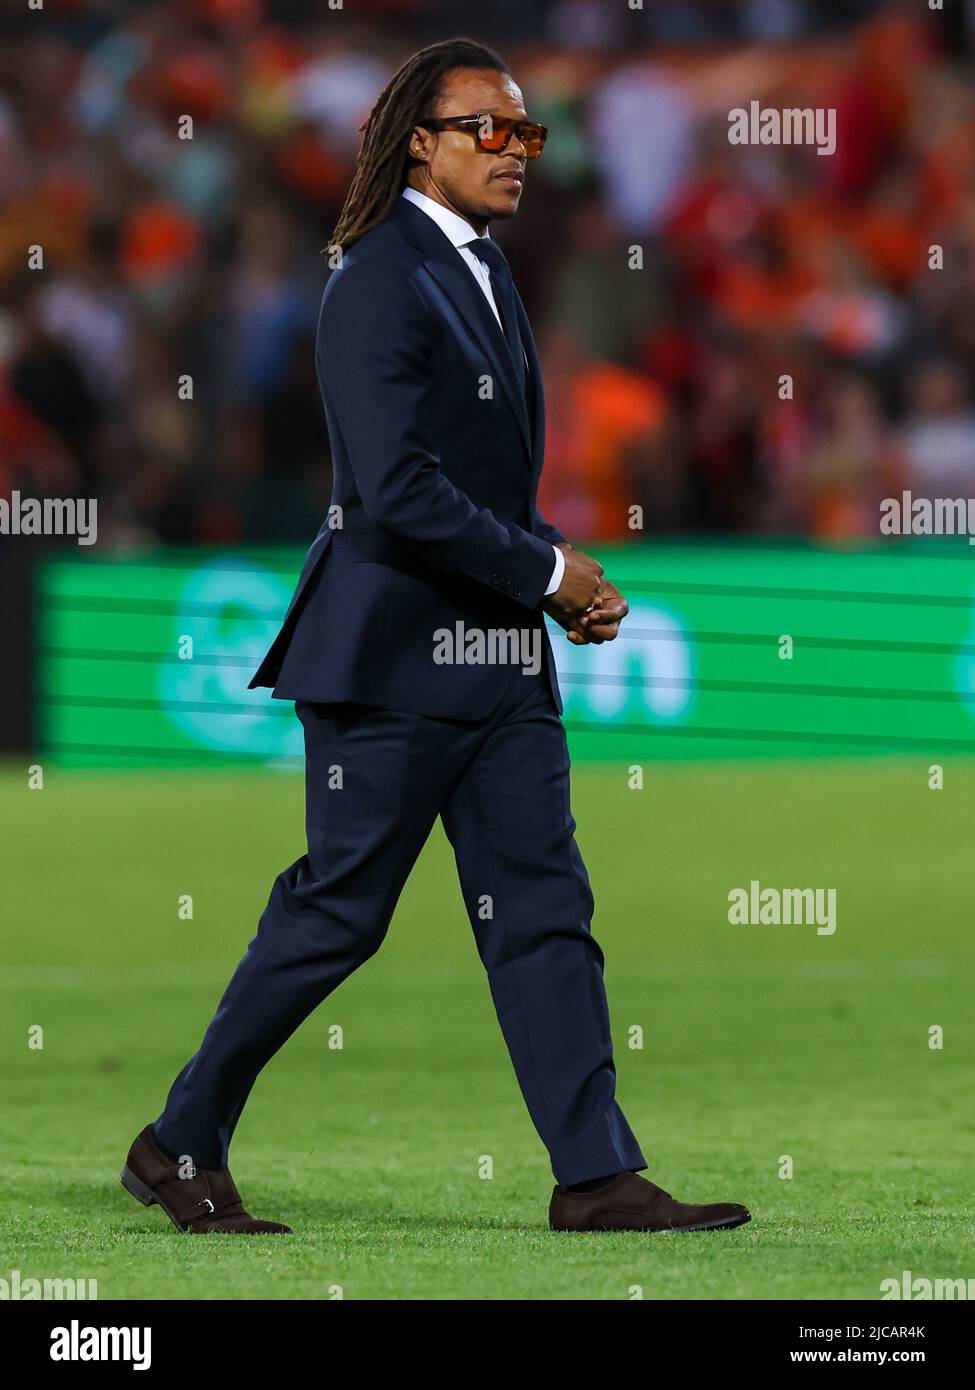 ROTTERDAM, NETHERLANDS - JUNE 11: Assistant coach Edgar Davids of the Netherlands during the UEFA Nations League A Group 4 match between the Netherlands and Poland at the De Kuip on June 11, 2022 in Rotterdam, Netherlands (Photo by Marcel ter Bals/Orange Pictures) Stock Photo